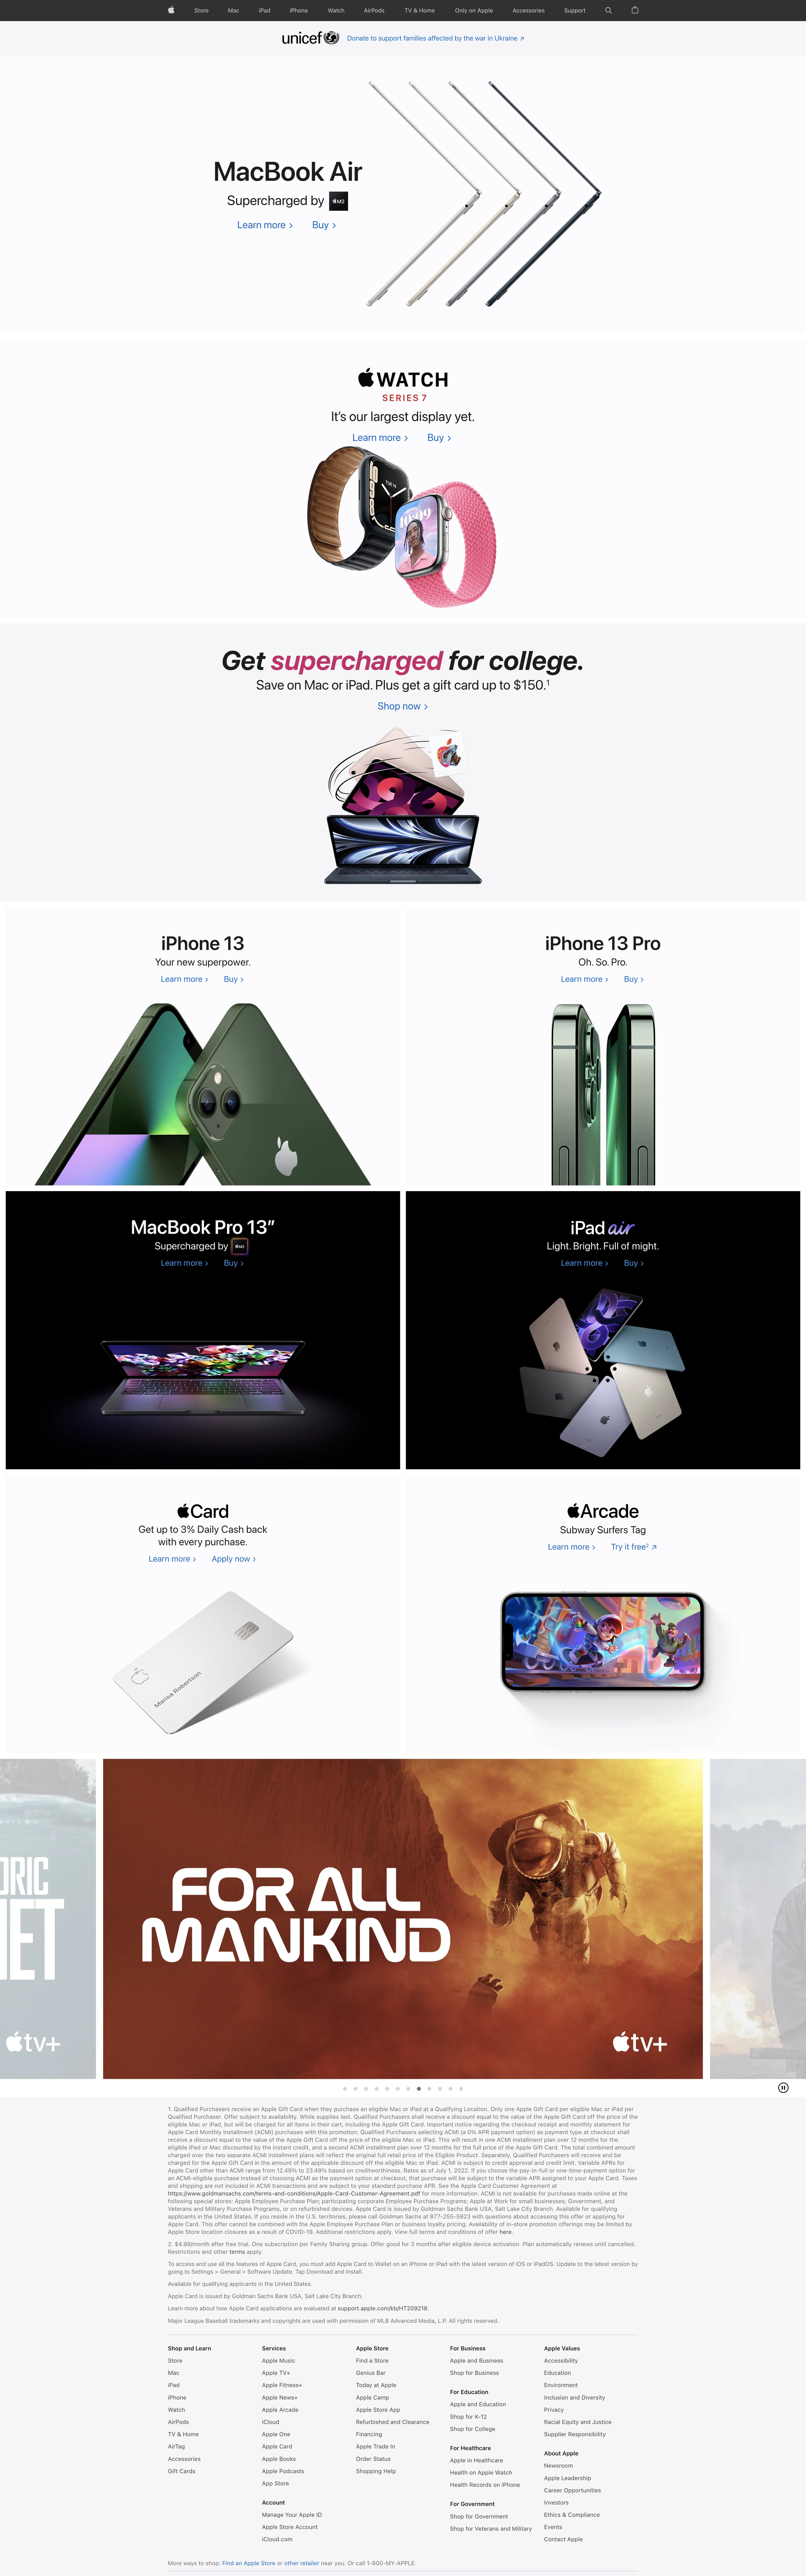 The Apple website after scroll